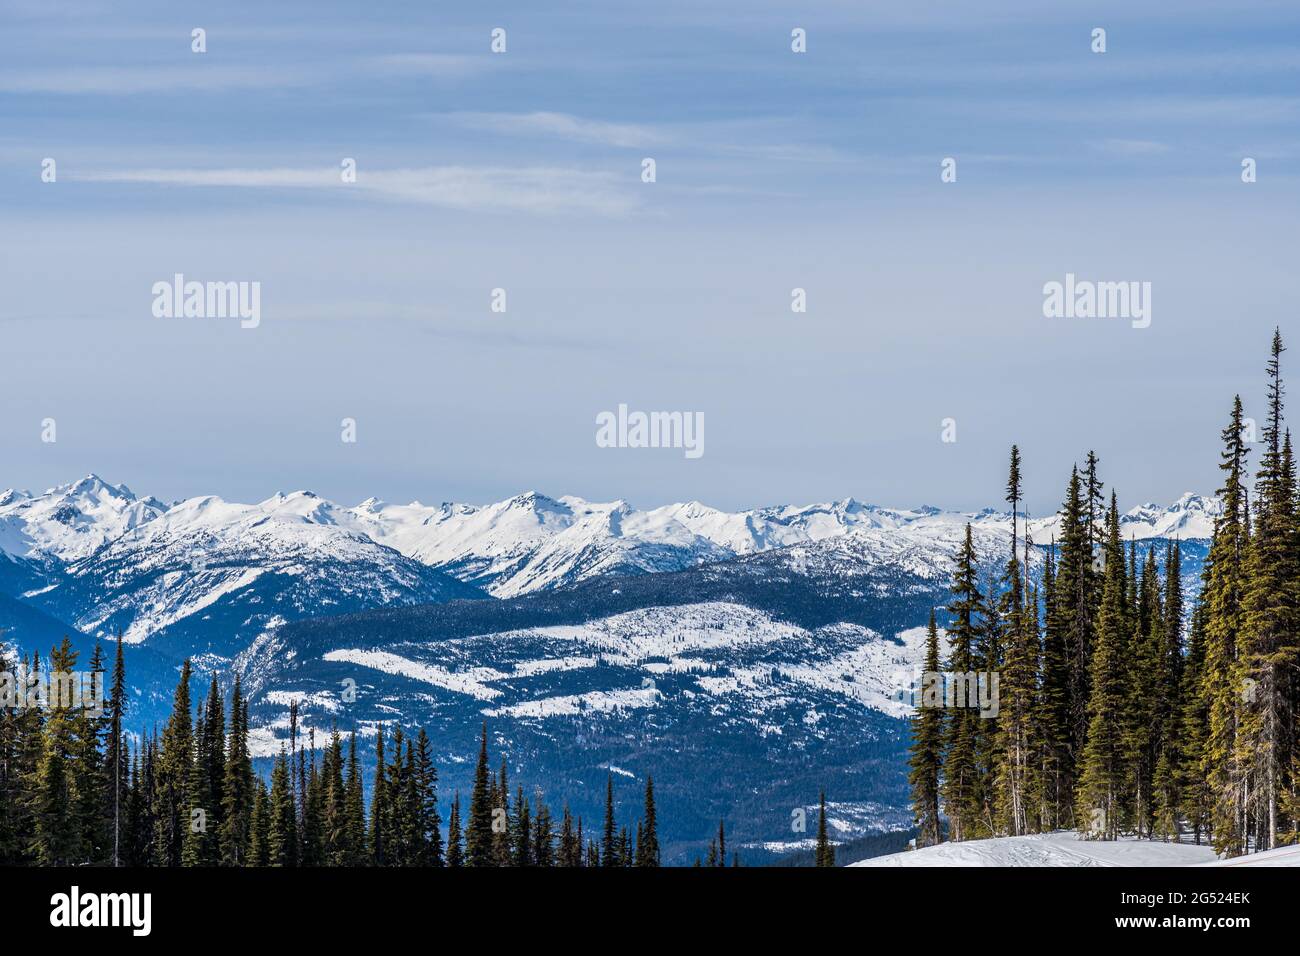 trees in front of beautiful snow-capped mountains against the blue sky in British Columbia Canada Stock Photo